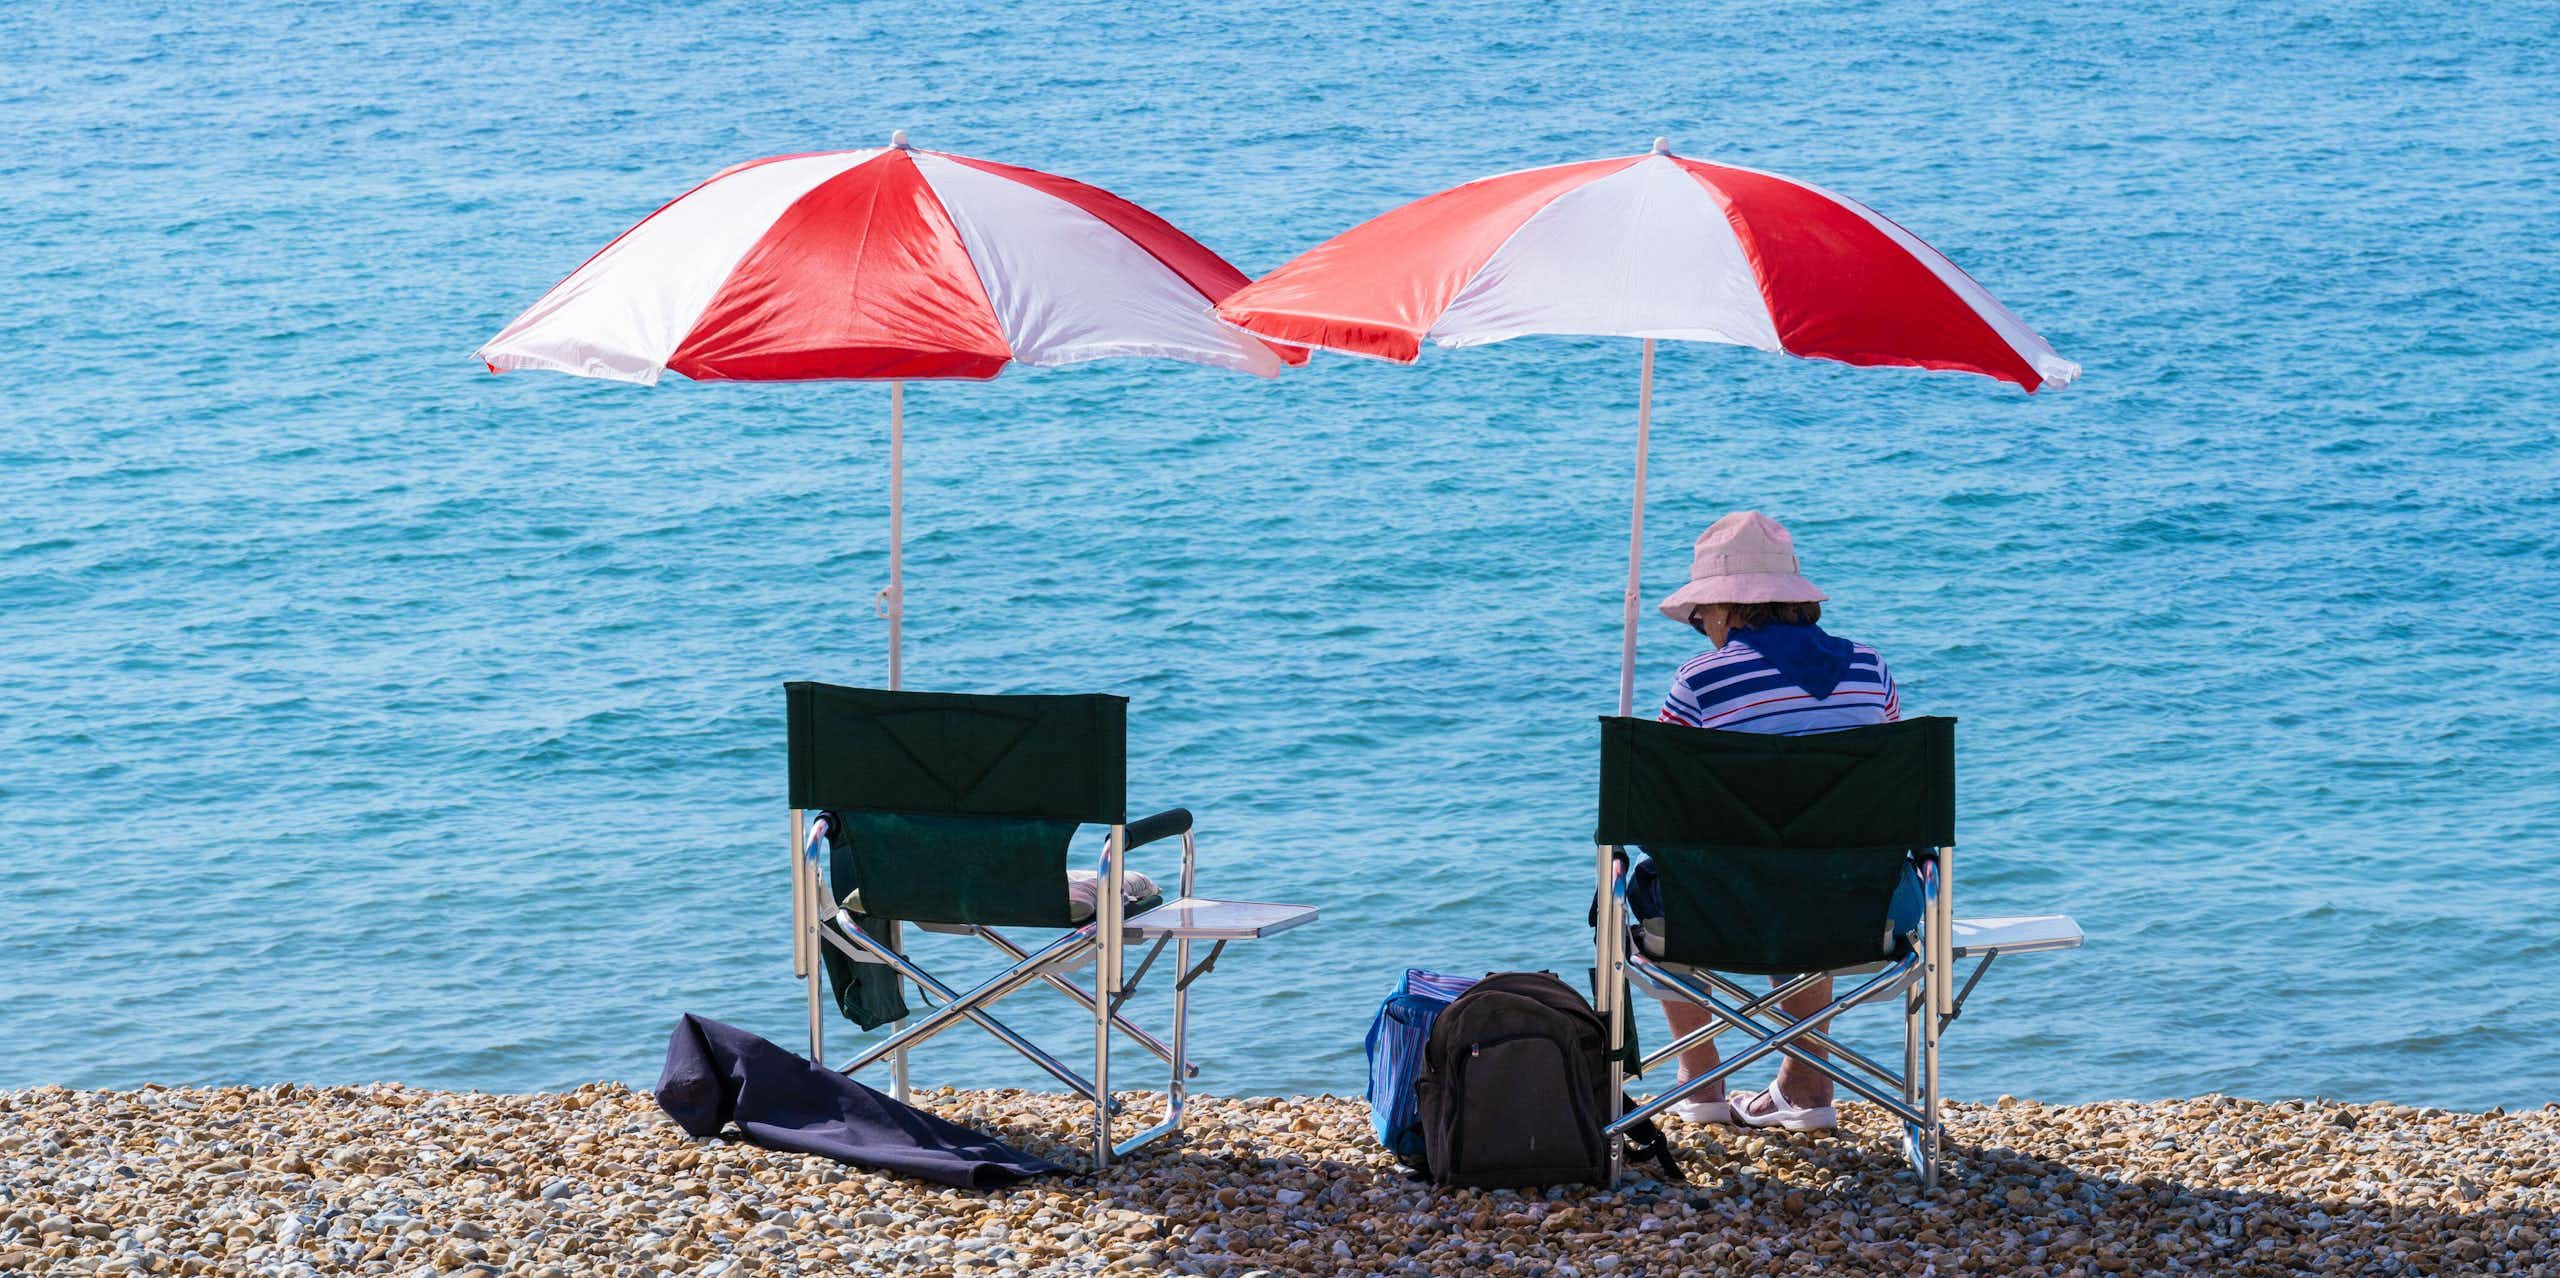 A person sitting on a pebbled beach with a red and white umbrella overhead